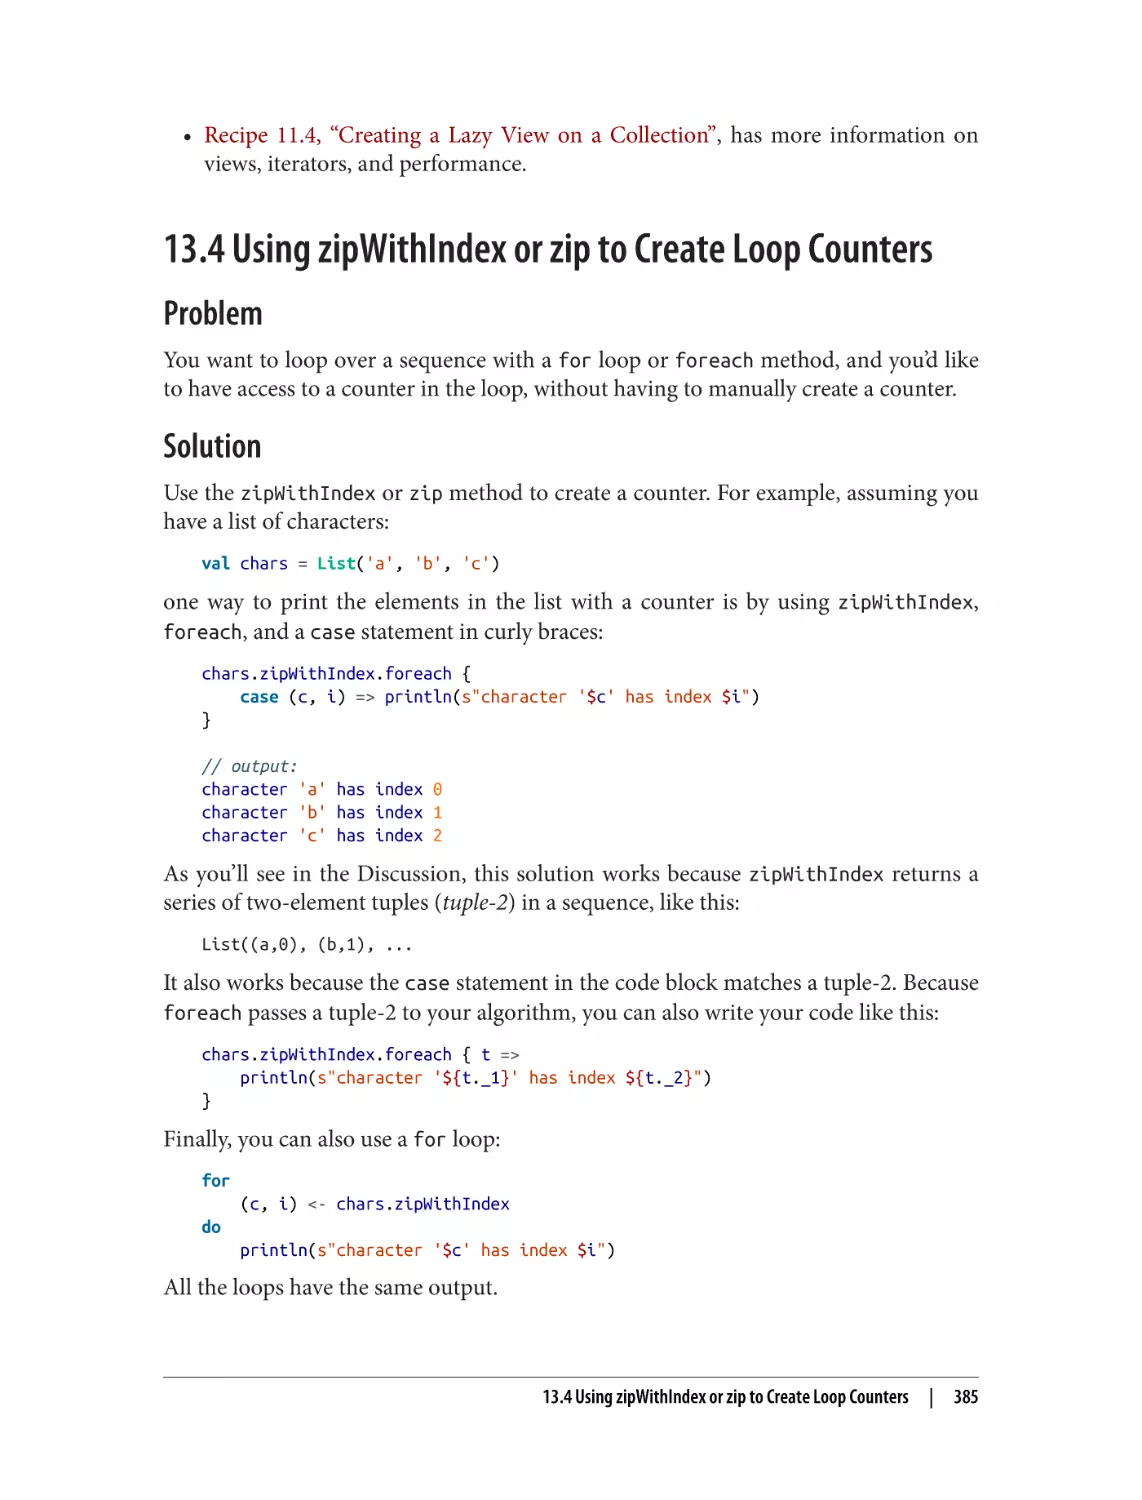 13.4 Using zipWithIndex or zip to Create Loop Counters
Problem
Solution